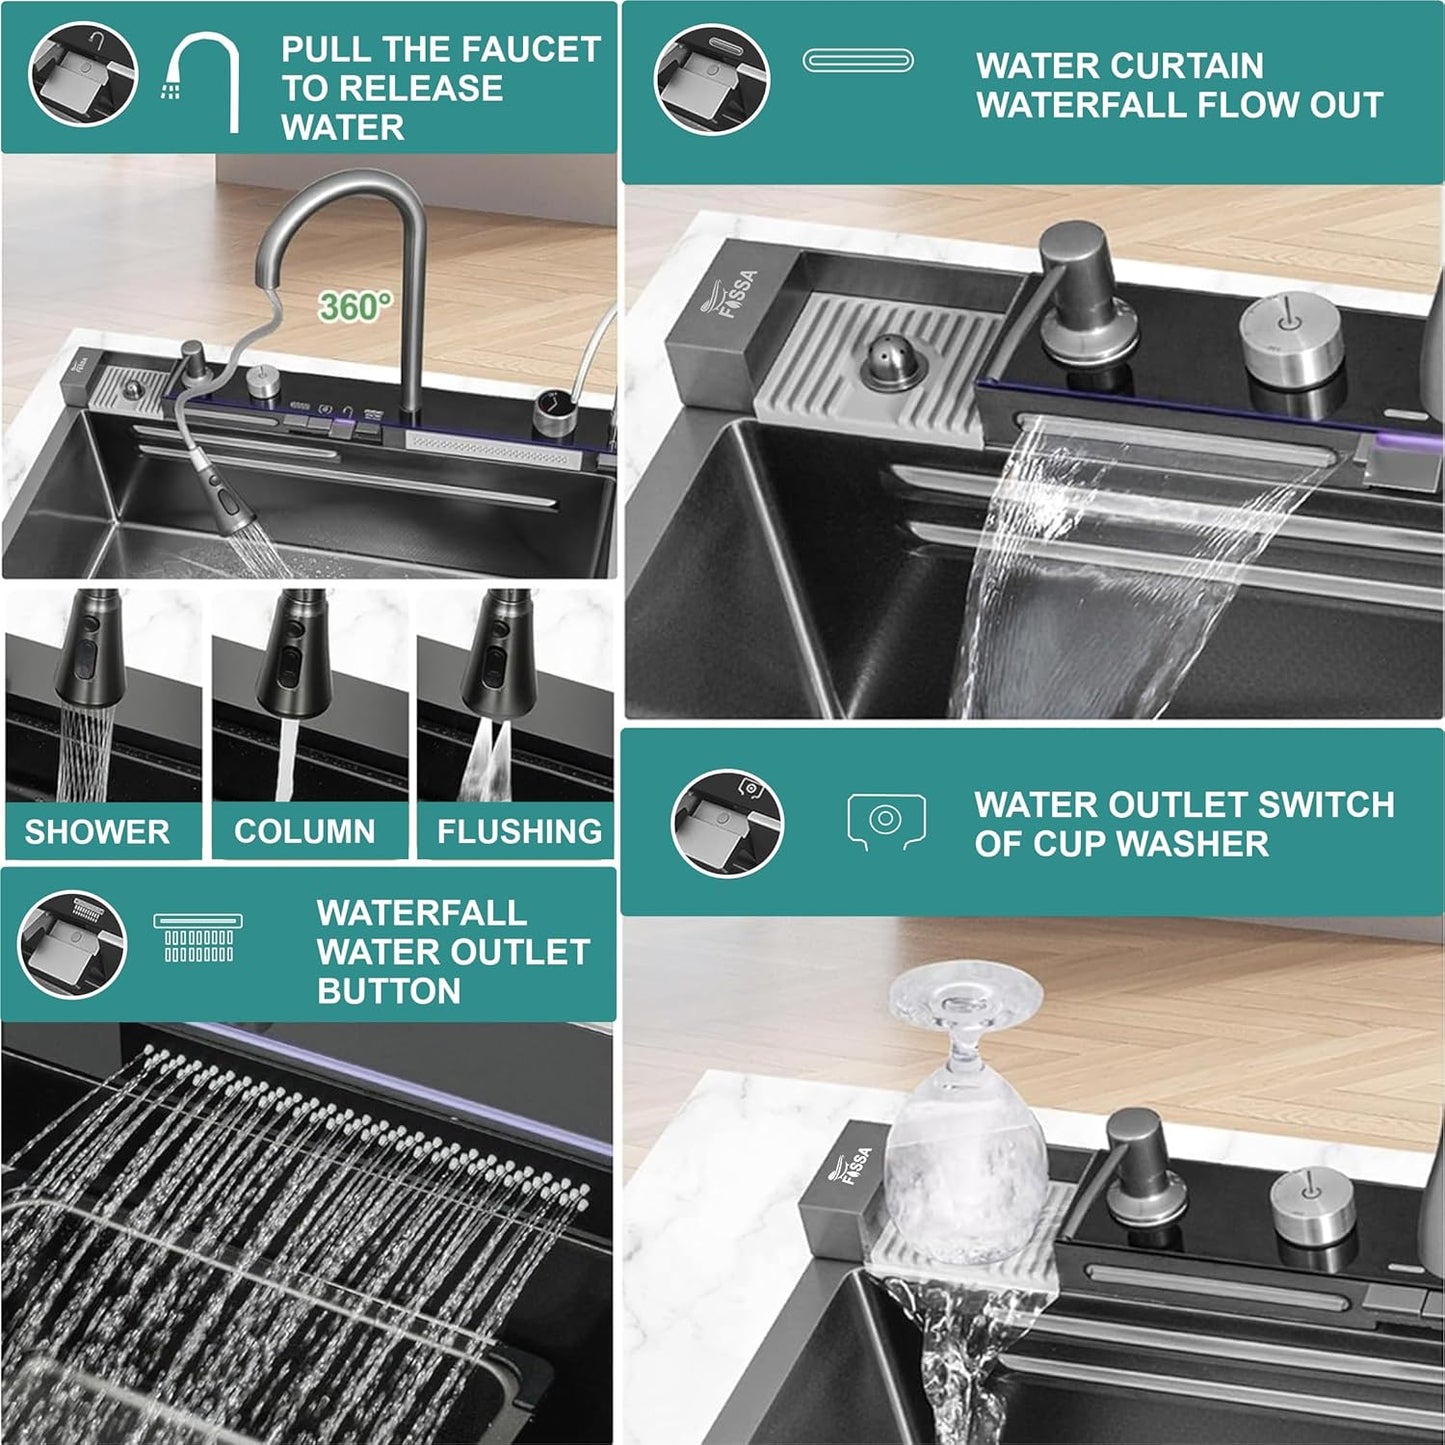 Fossa 30"x18"x10" inch Piano Fully Equipped Kitchen Sink with Integrated Waterfall and Pull-down Faucets - SS-304 Grade Stainless Steel Sink with LED Pannel and Digital Display - Nano Black Finish